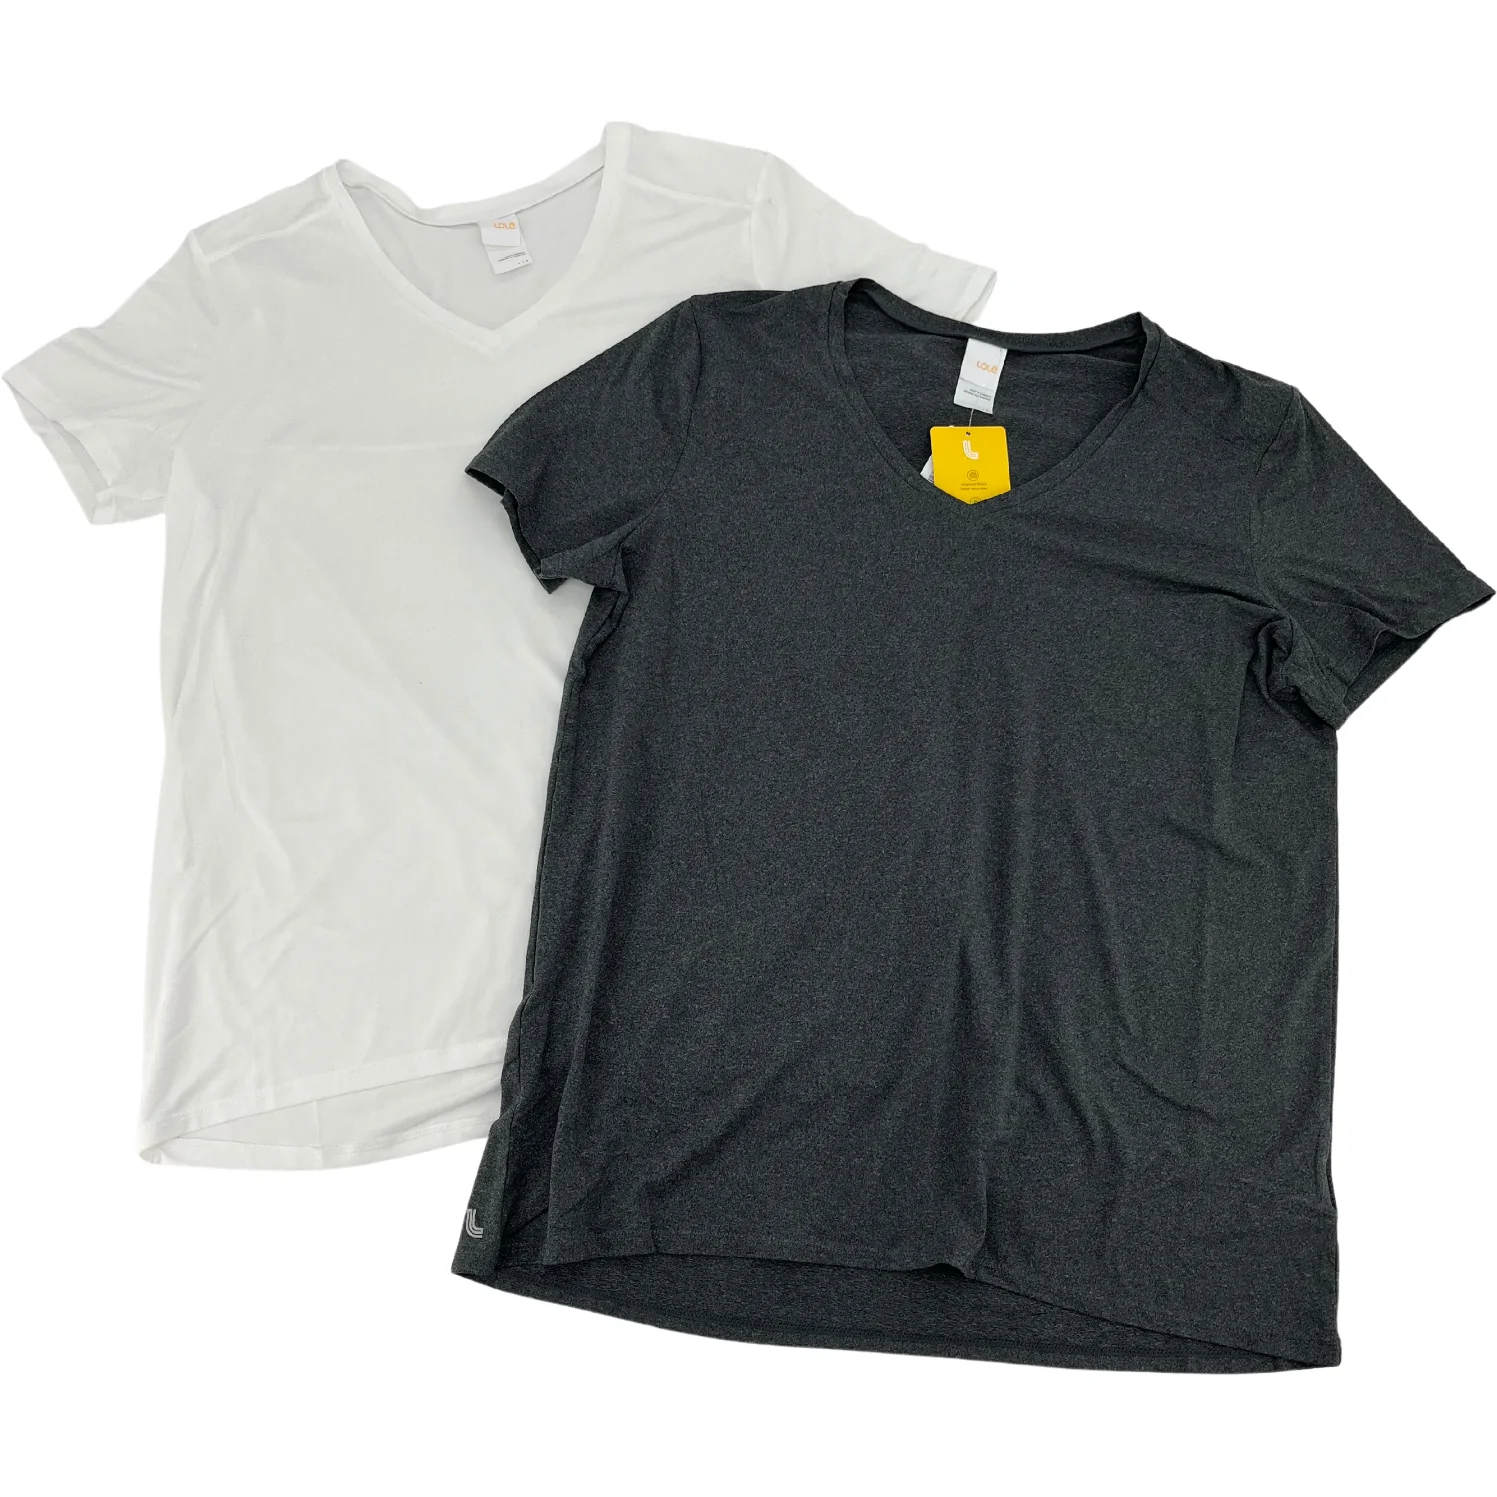 Lole Women’s Grey & White T-Shirts Pack / Various Sizes